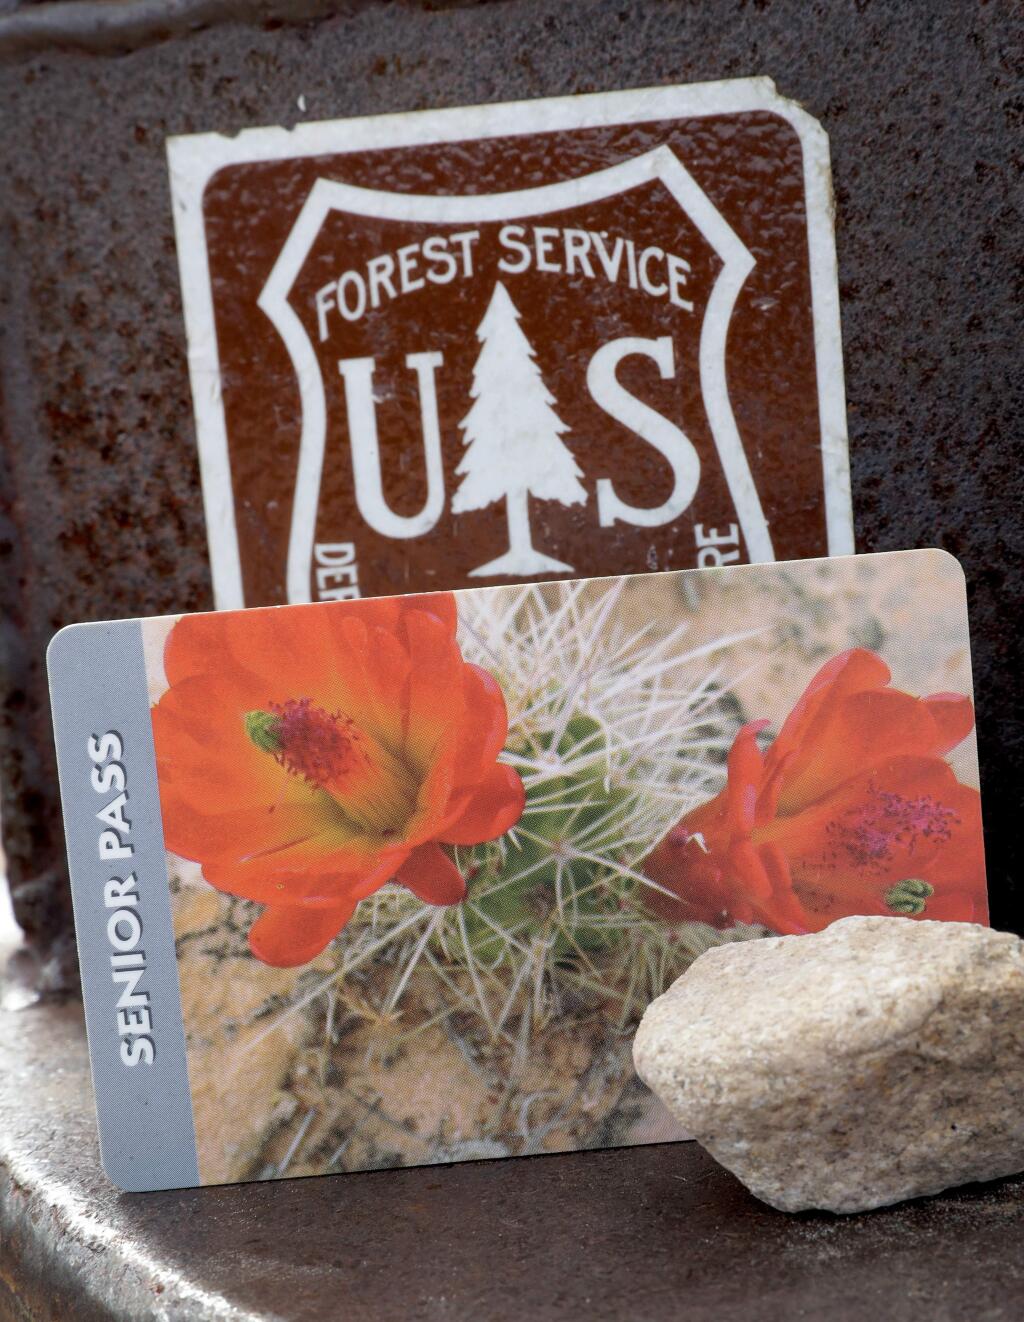 An America the Beautiful Lifetime Senior Pass is shown at Bull Dog Canyon in the Tonto National Forest in Fort McDowell, Ariz., Tuesday, Aug. 1, 2017. Seniors are snapping up so many lifetime passes good for national parks and other federal recreation sites ahead of a big price increase later this month that government agencies have started a rain check policy. The America the Beautiful Lifetime Senior Pass available to buyers 62 and older costs $10 but is going up 700 percent to $80 on Aug. 28. (AP Photo/Matt York)